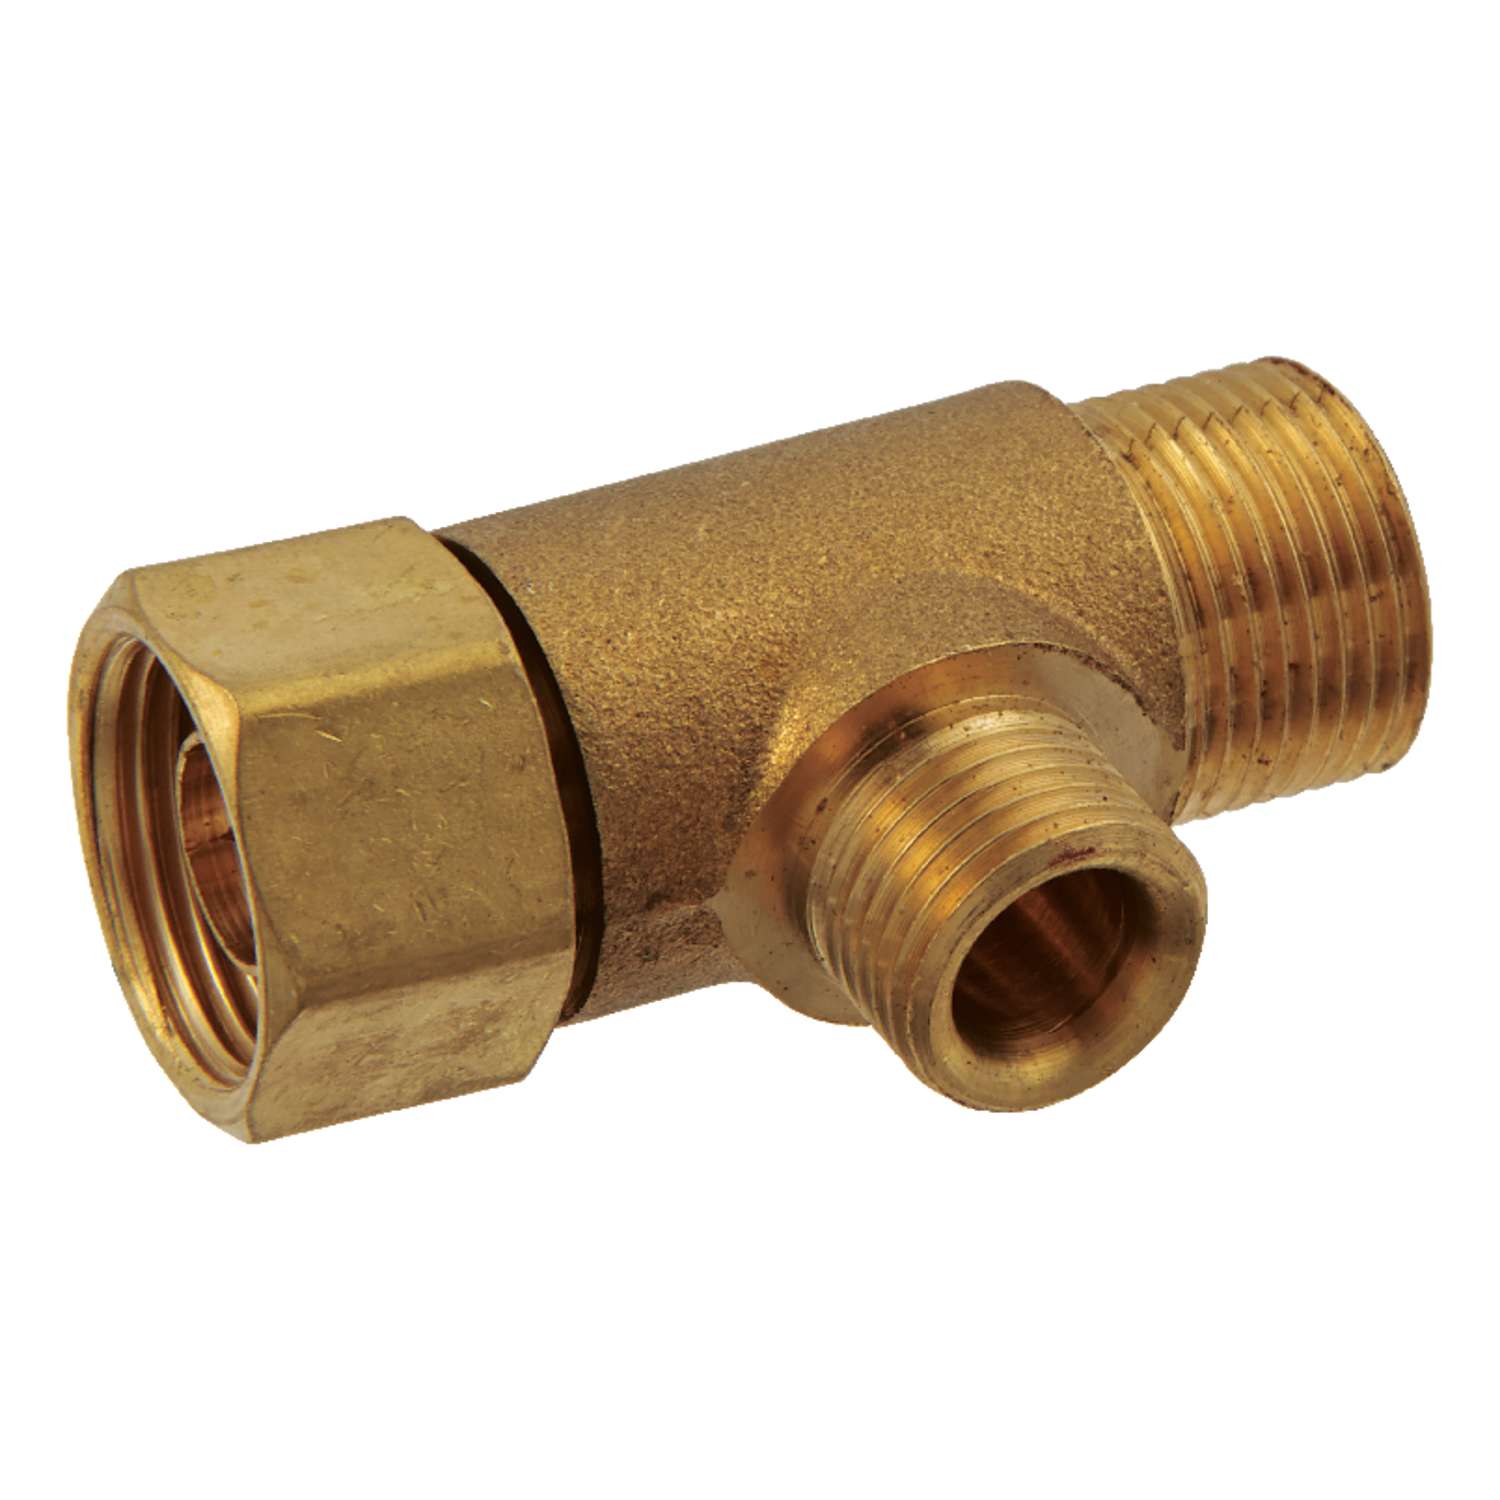 1/4 Compression Tee Fitting with 1/8 Male NPT Thread Brass Male